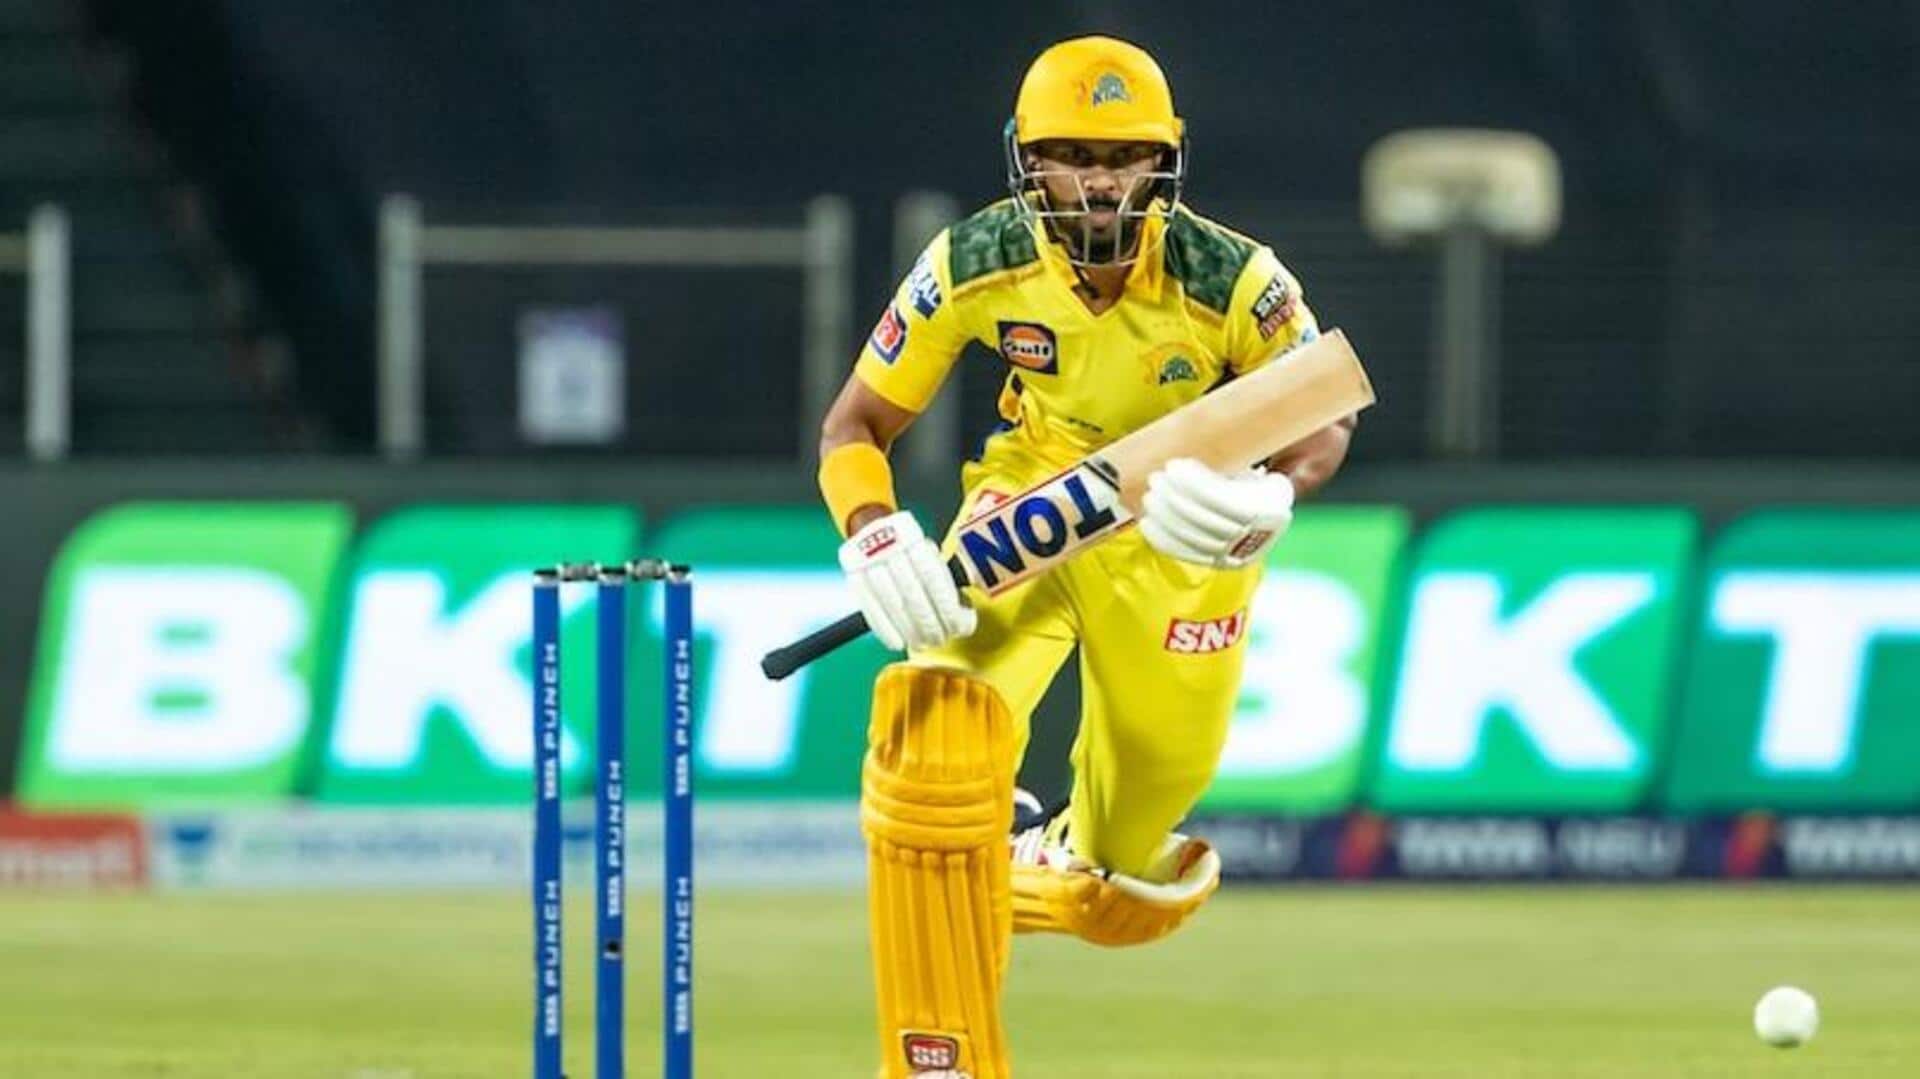 How does Ruturaj Gaikwad fare against left-arm pacers in IPL?